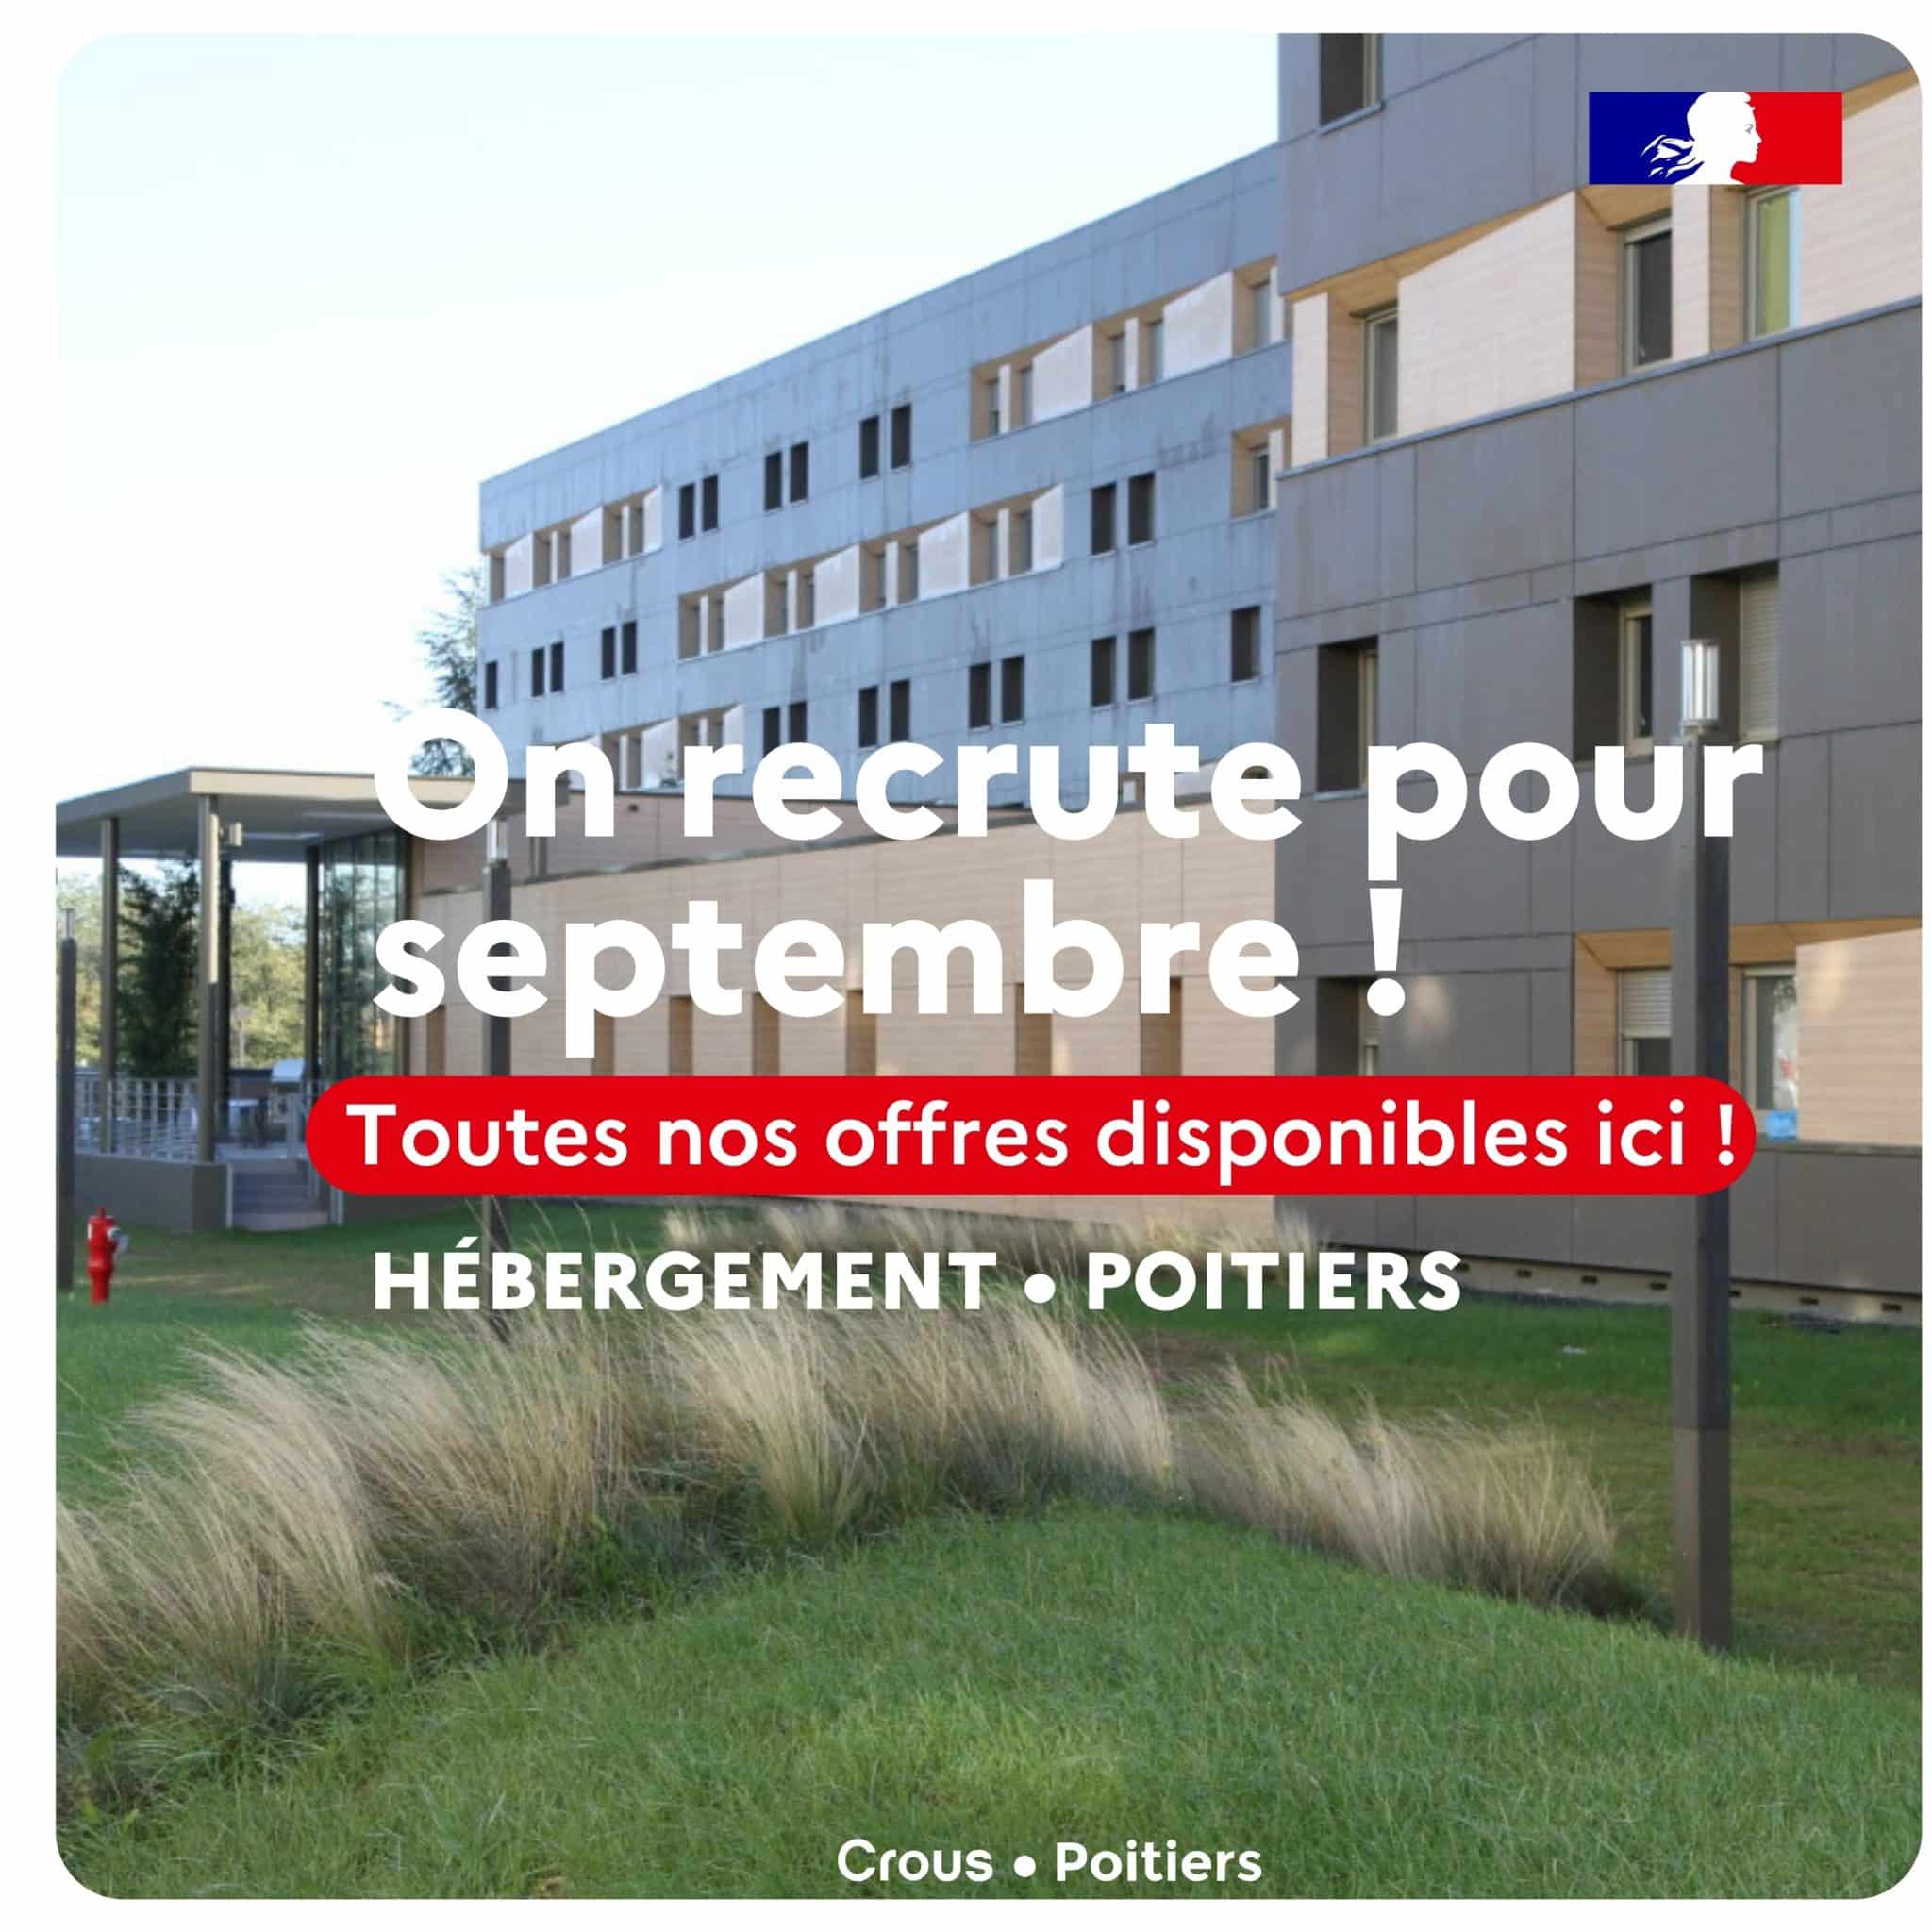 POITIERS HEBERGEMENT VACATAIRES AFFICHE min scaled